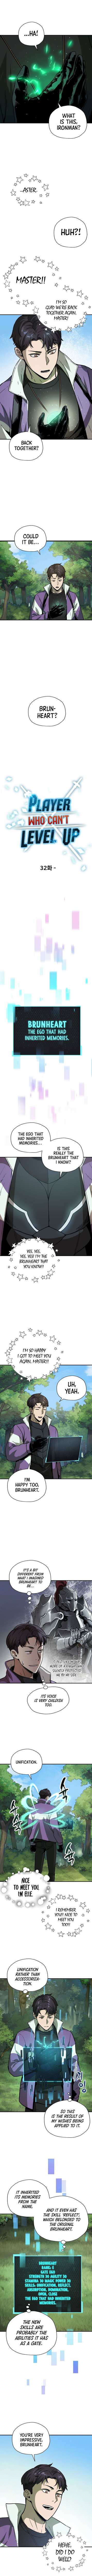 the-player-that-cant-level-up-chap-32-2